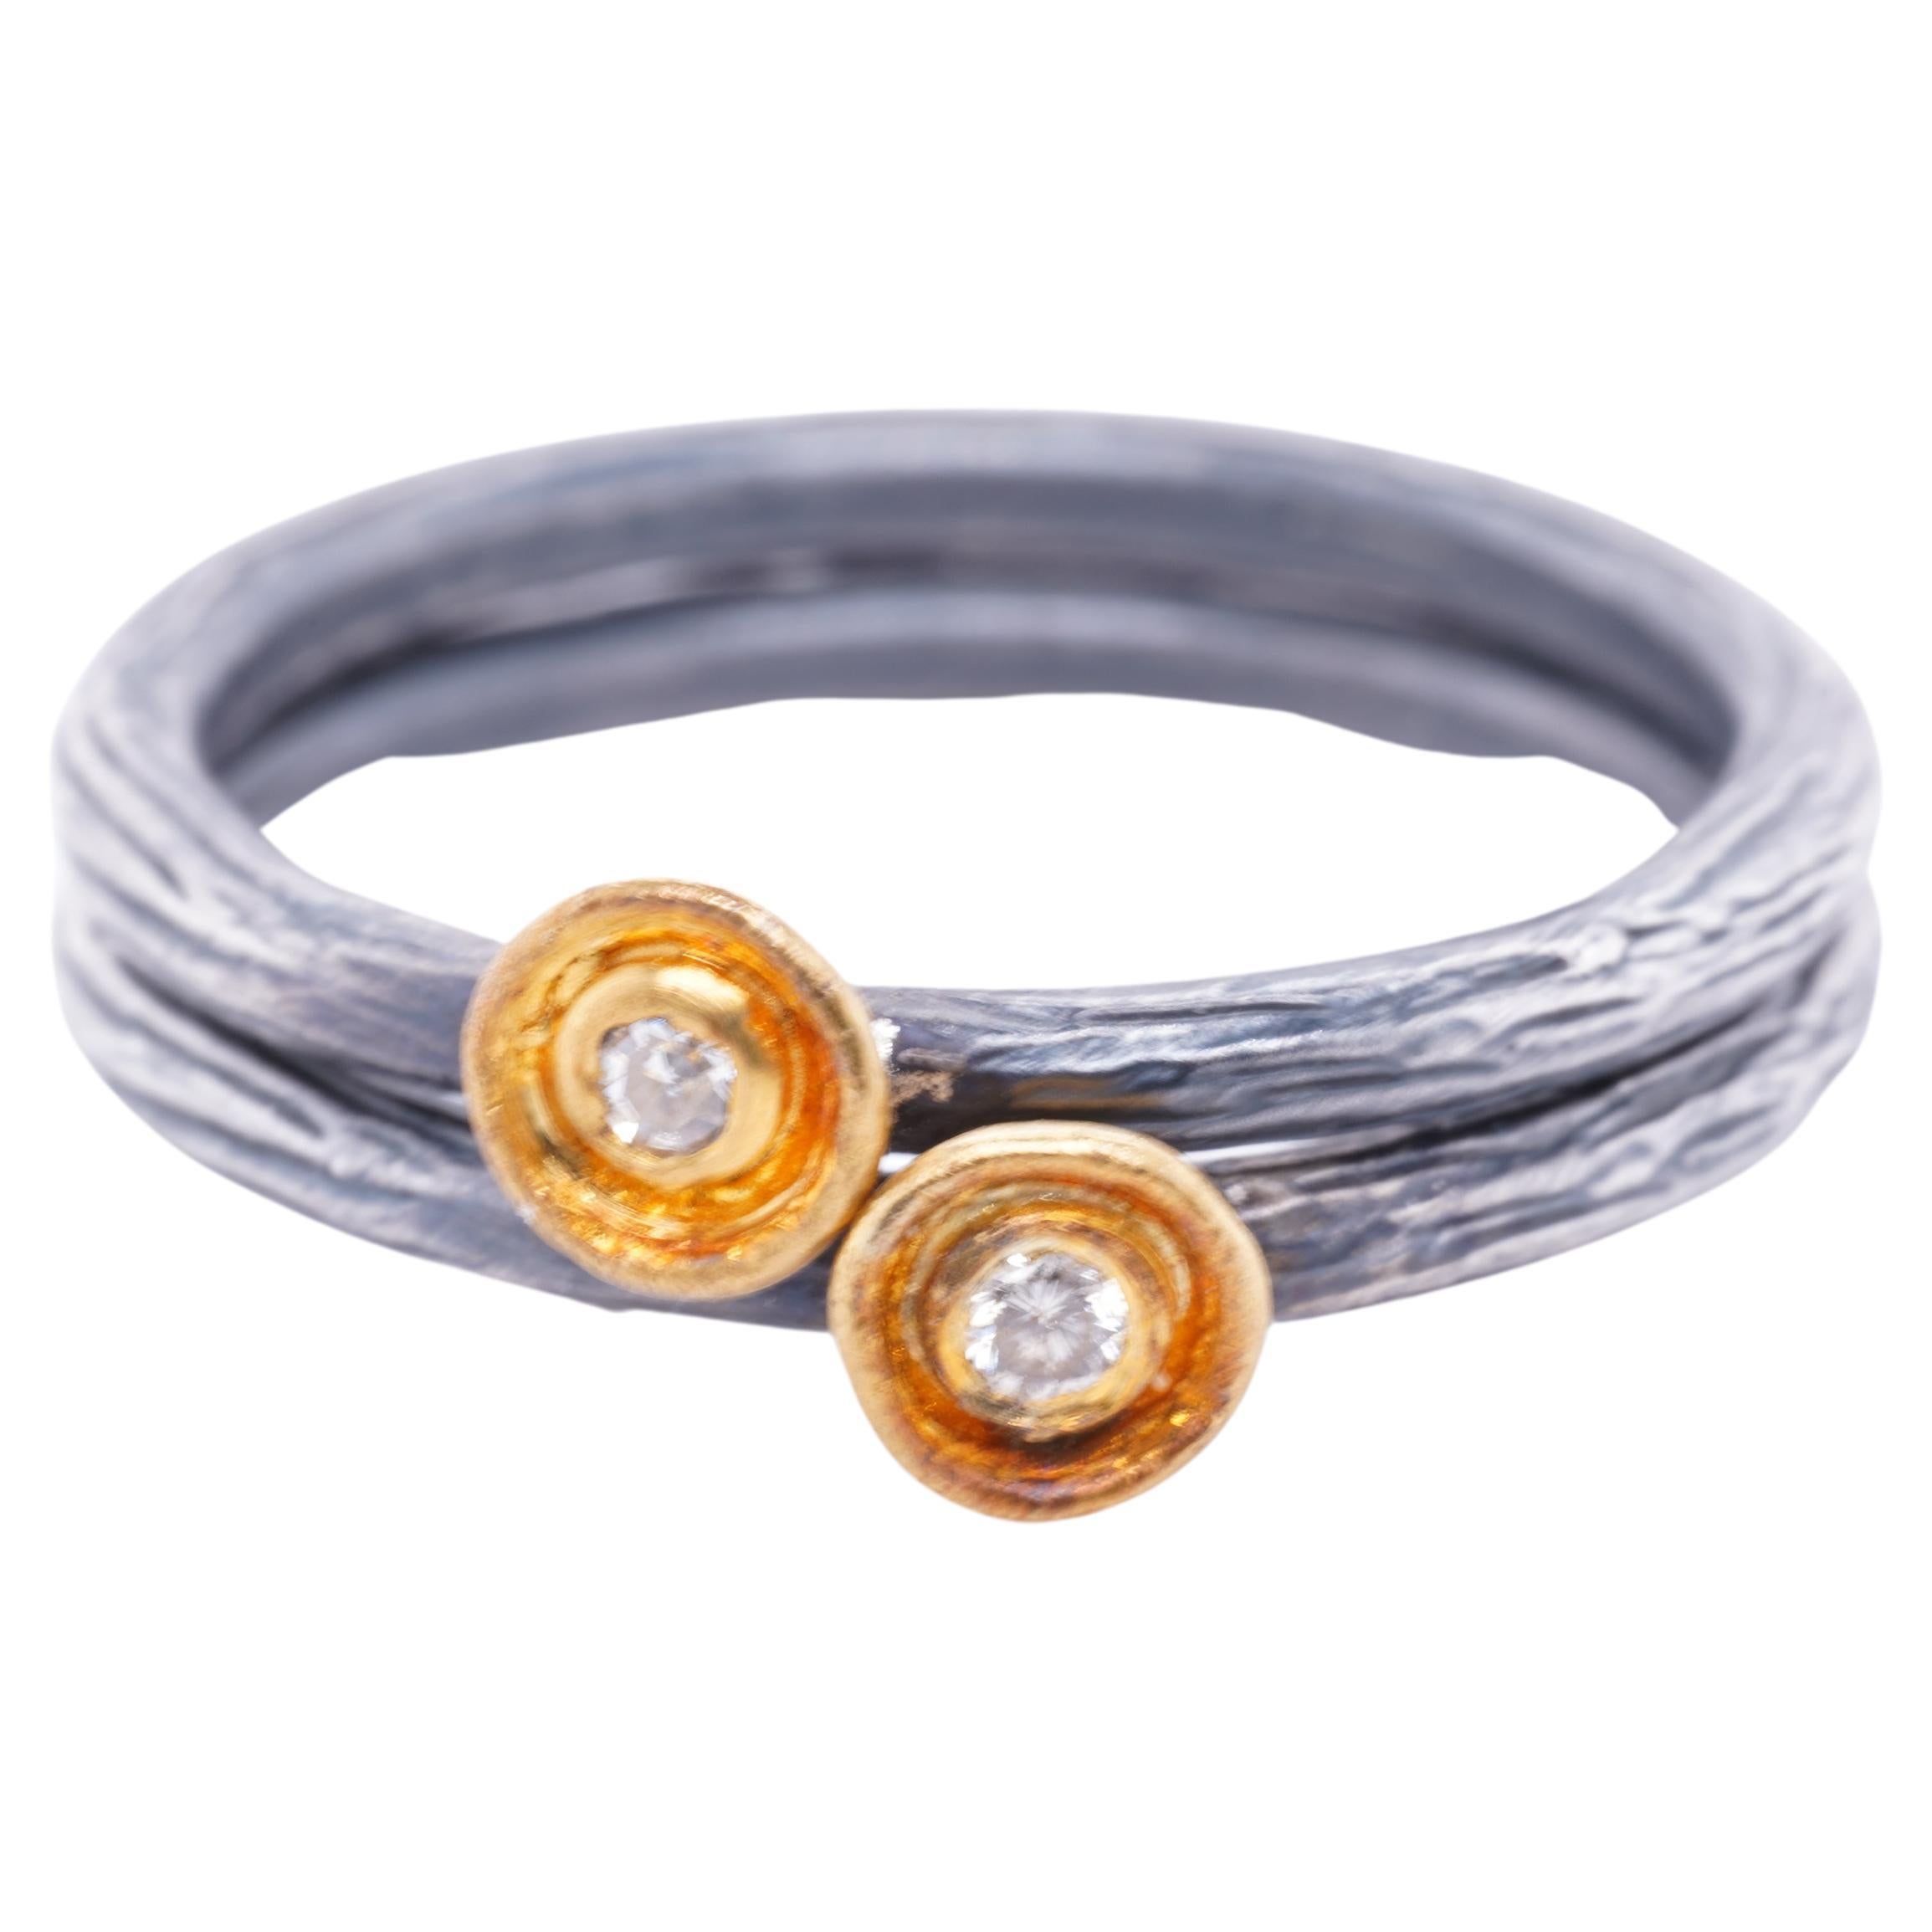 Delicate 24K Yellow Gold Circle Ring with Diamond & Silver Ring